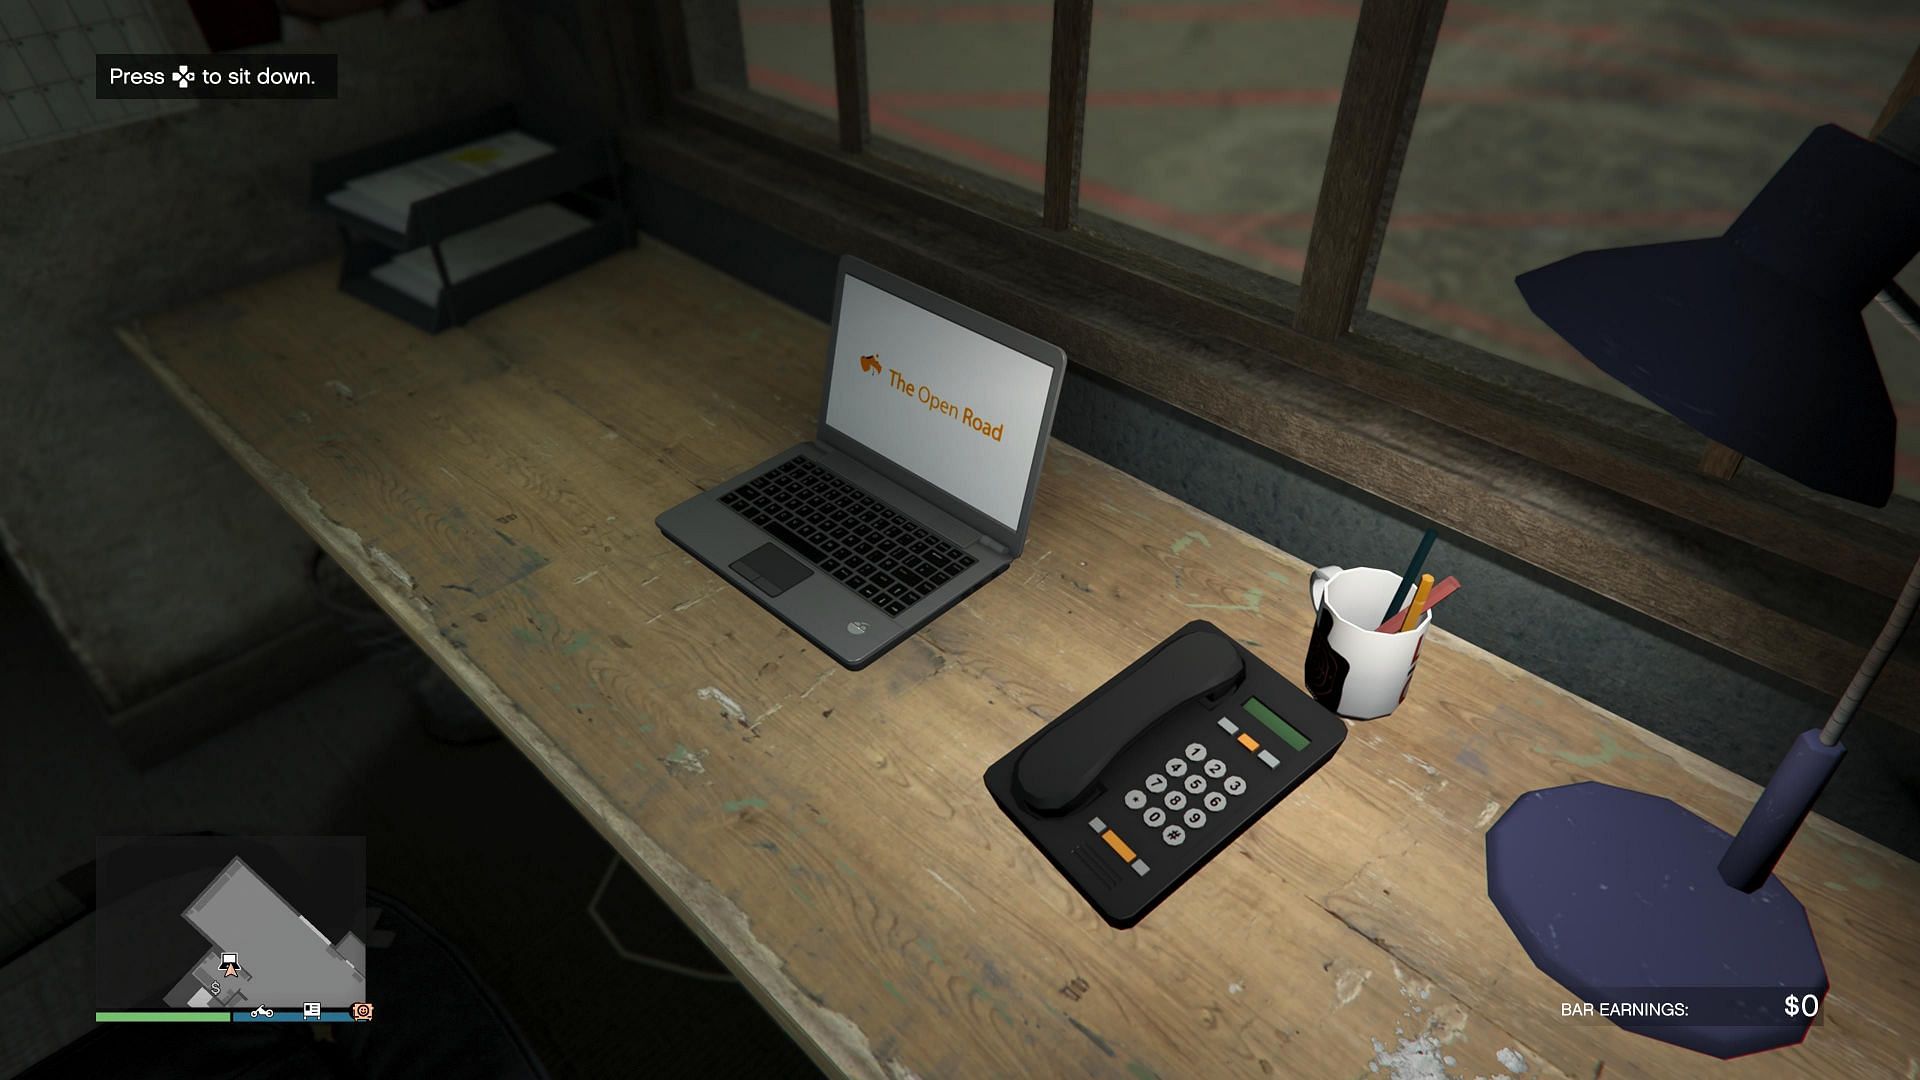 This is the laptop you must use (Image via Rockstar Games)